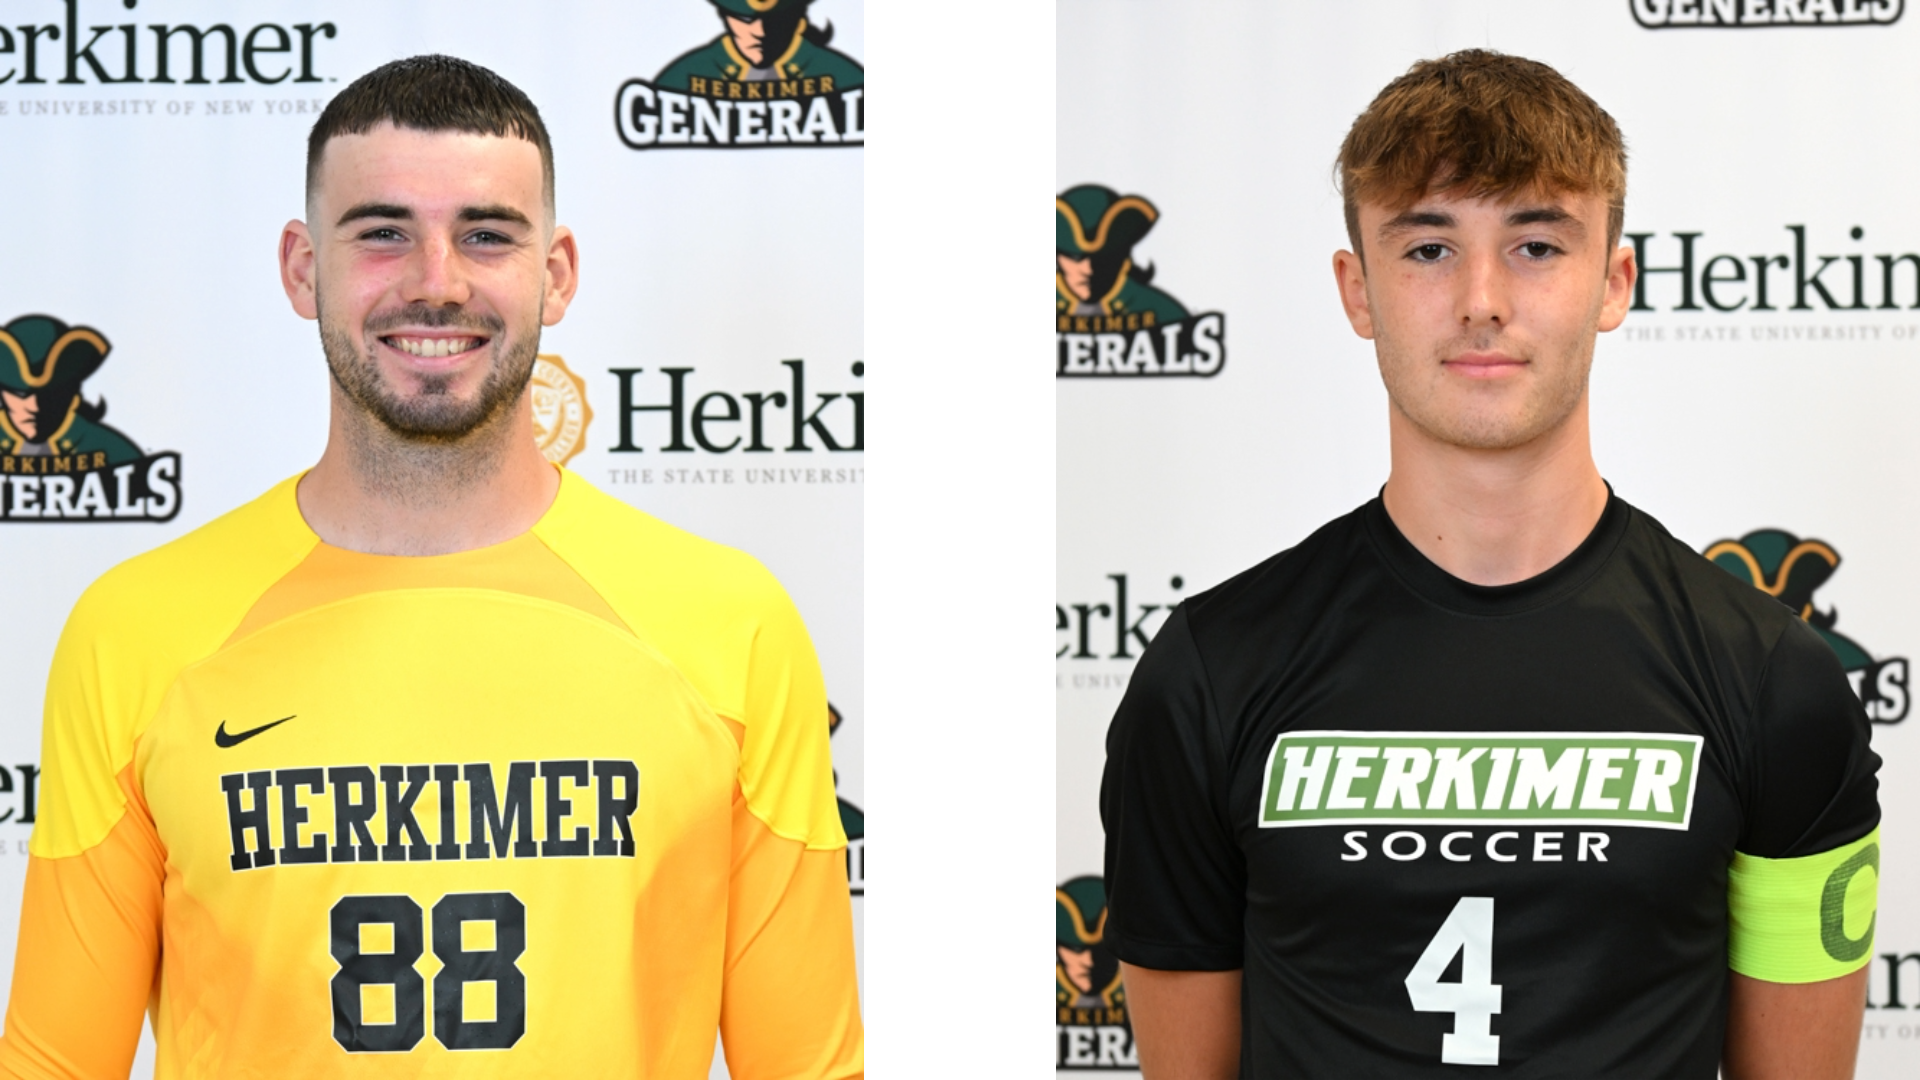 Carney, Bowden named United Soccer Coaches Association All-Americans